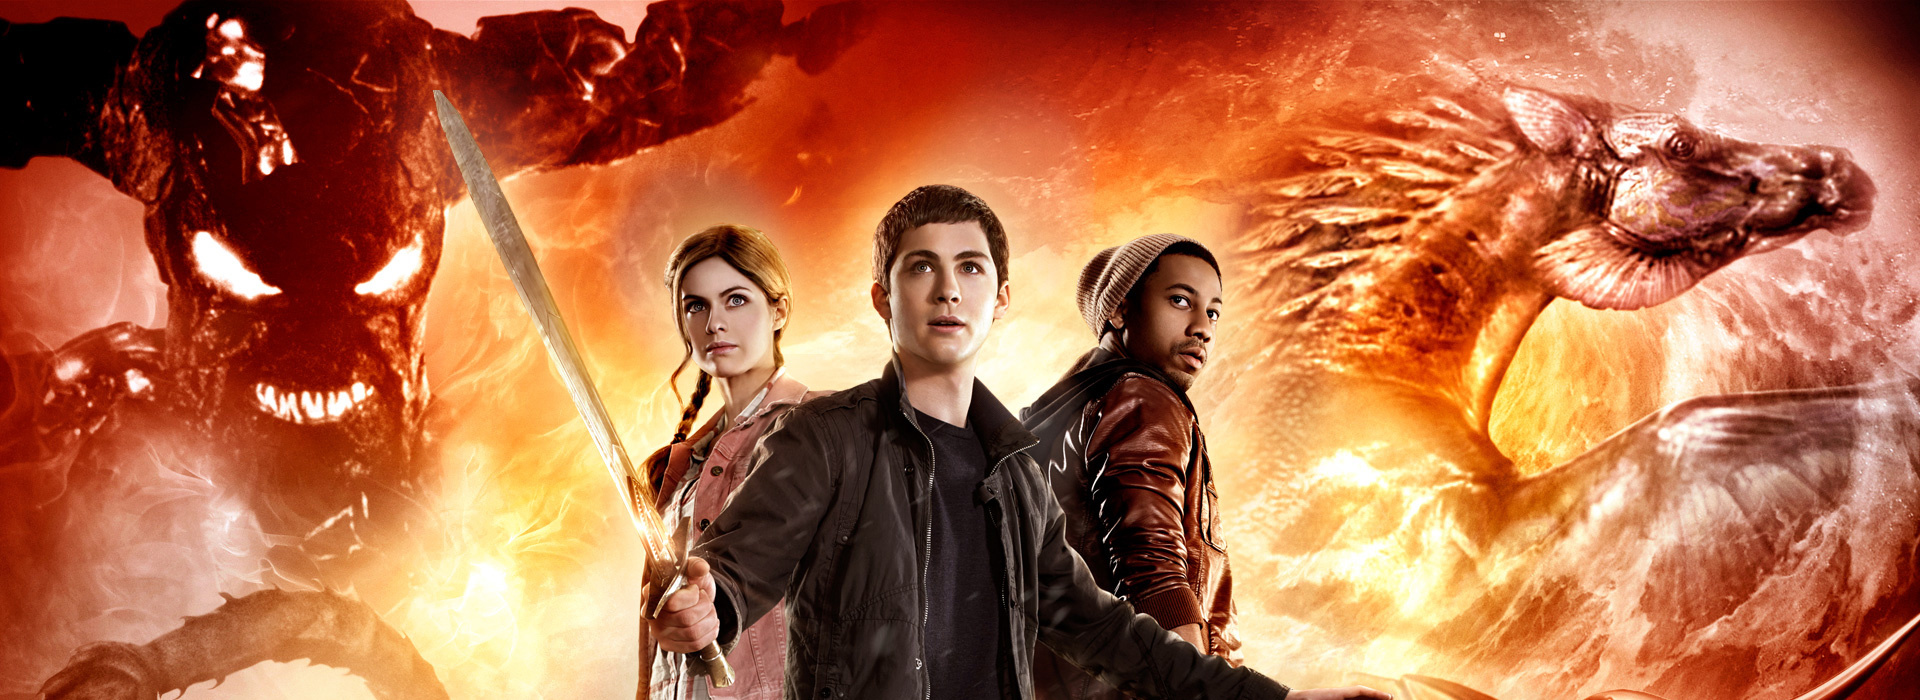 Movie poster Percy Jackson: Sea of Monsters